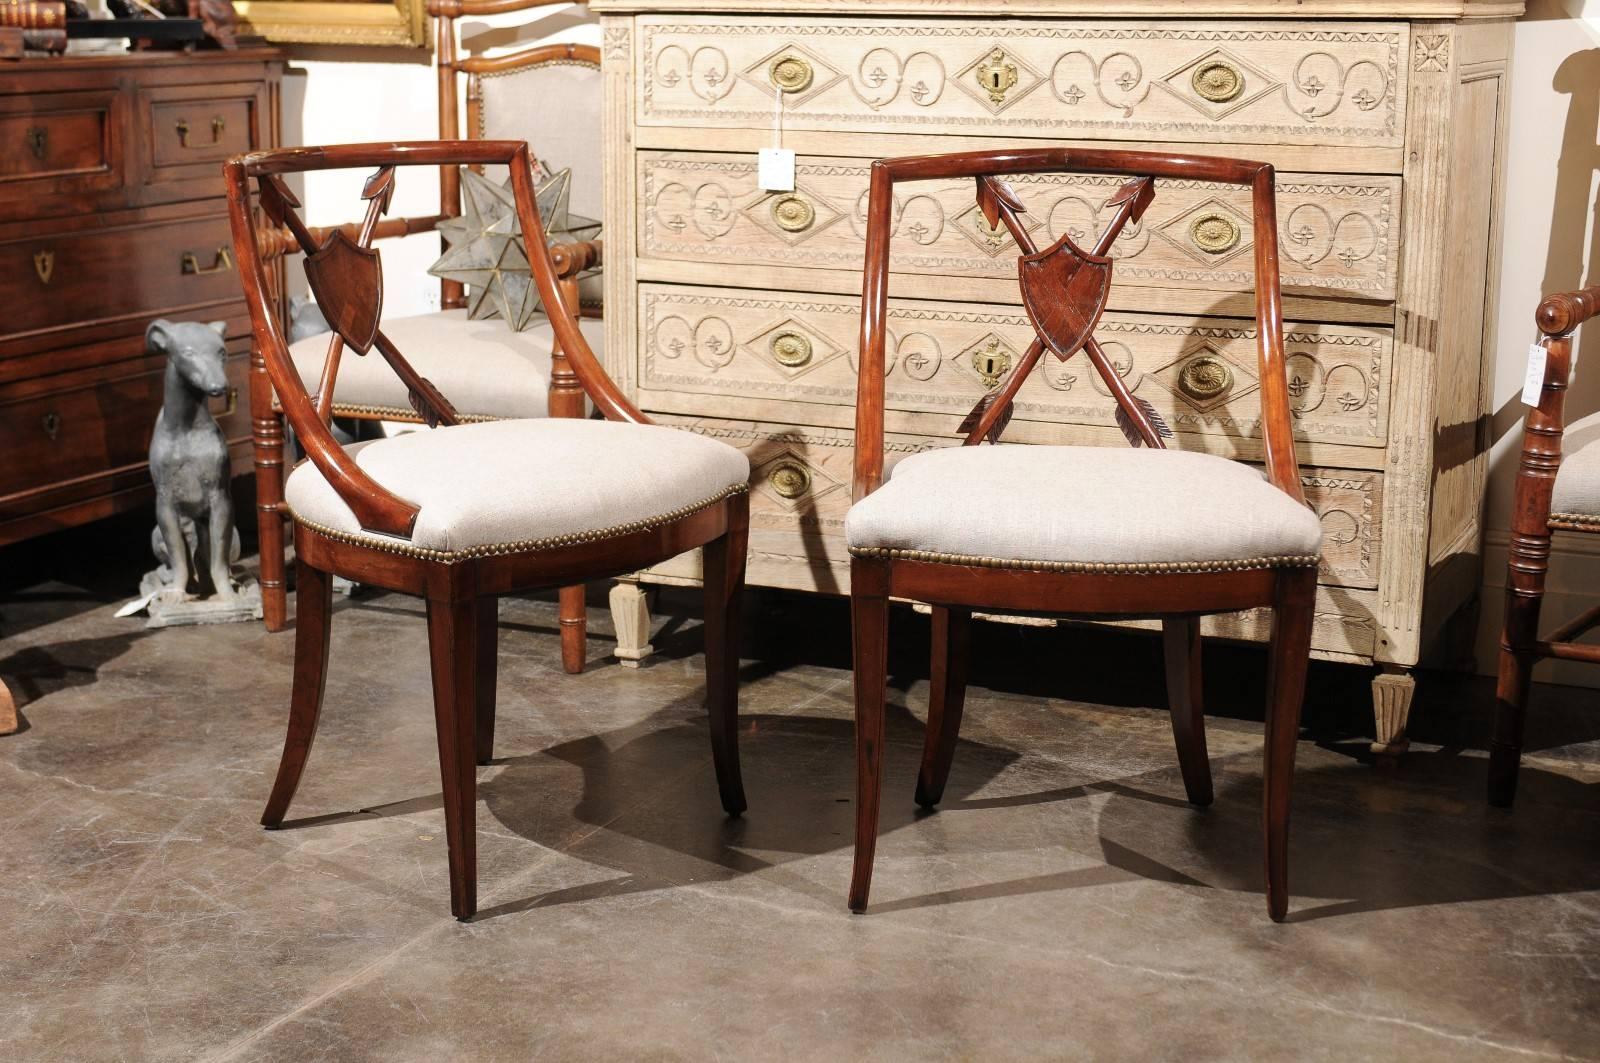 A pair of Biedermeier period Austrian upholstered armchairs with trophy of arms backs from the mid-19th century. Each of these Biedermeier armchairs circa 1840 features a sleek, curved back pierced in its center with trophy of arms made of a shield